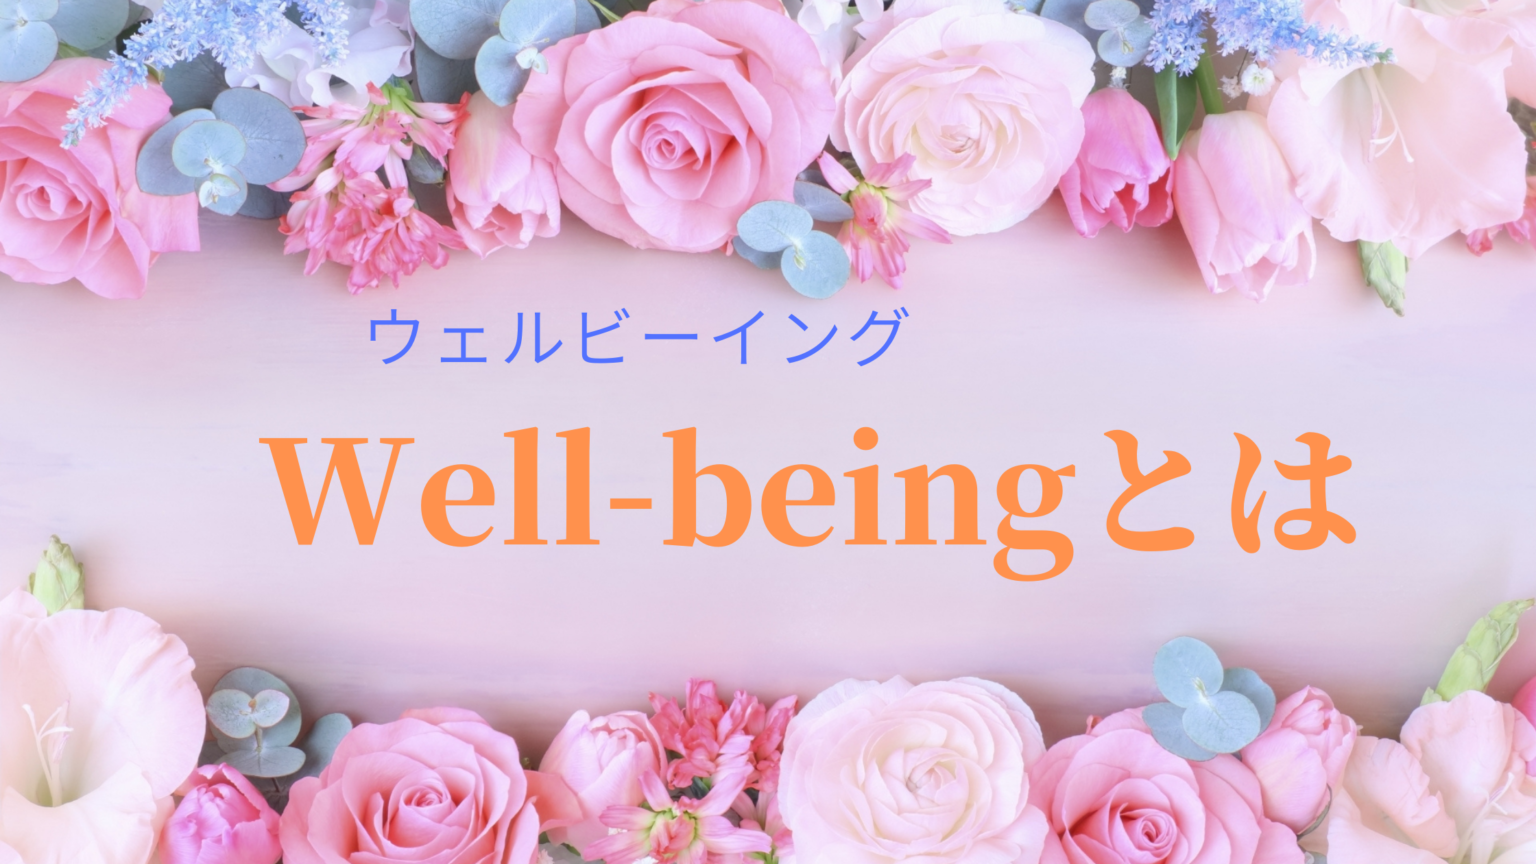 Well-beingとは